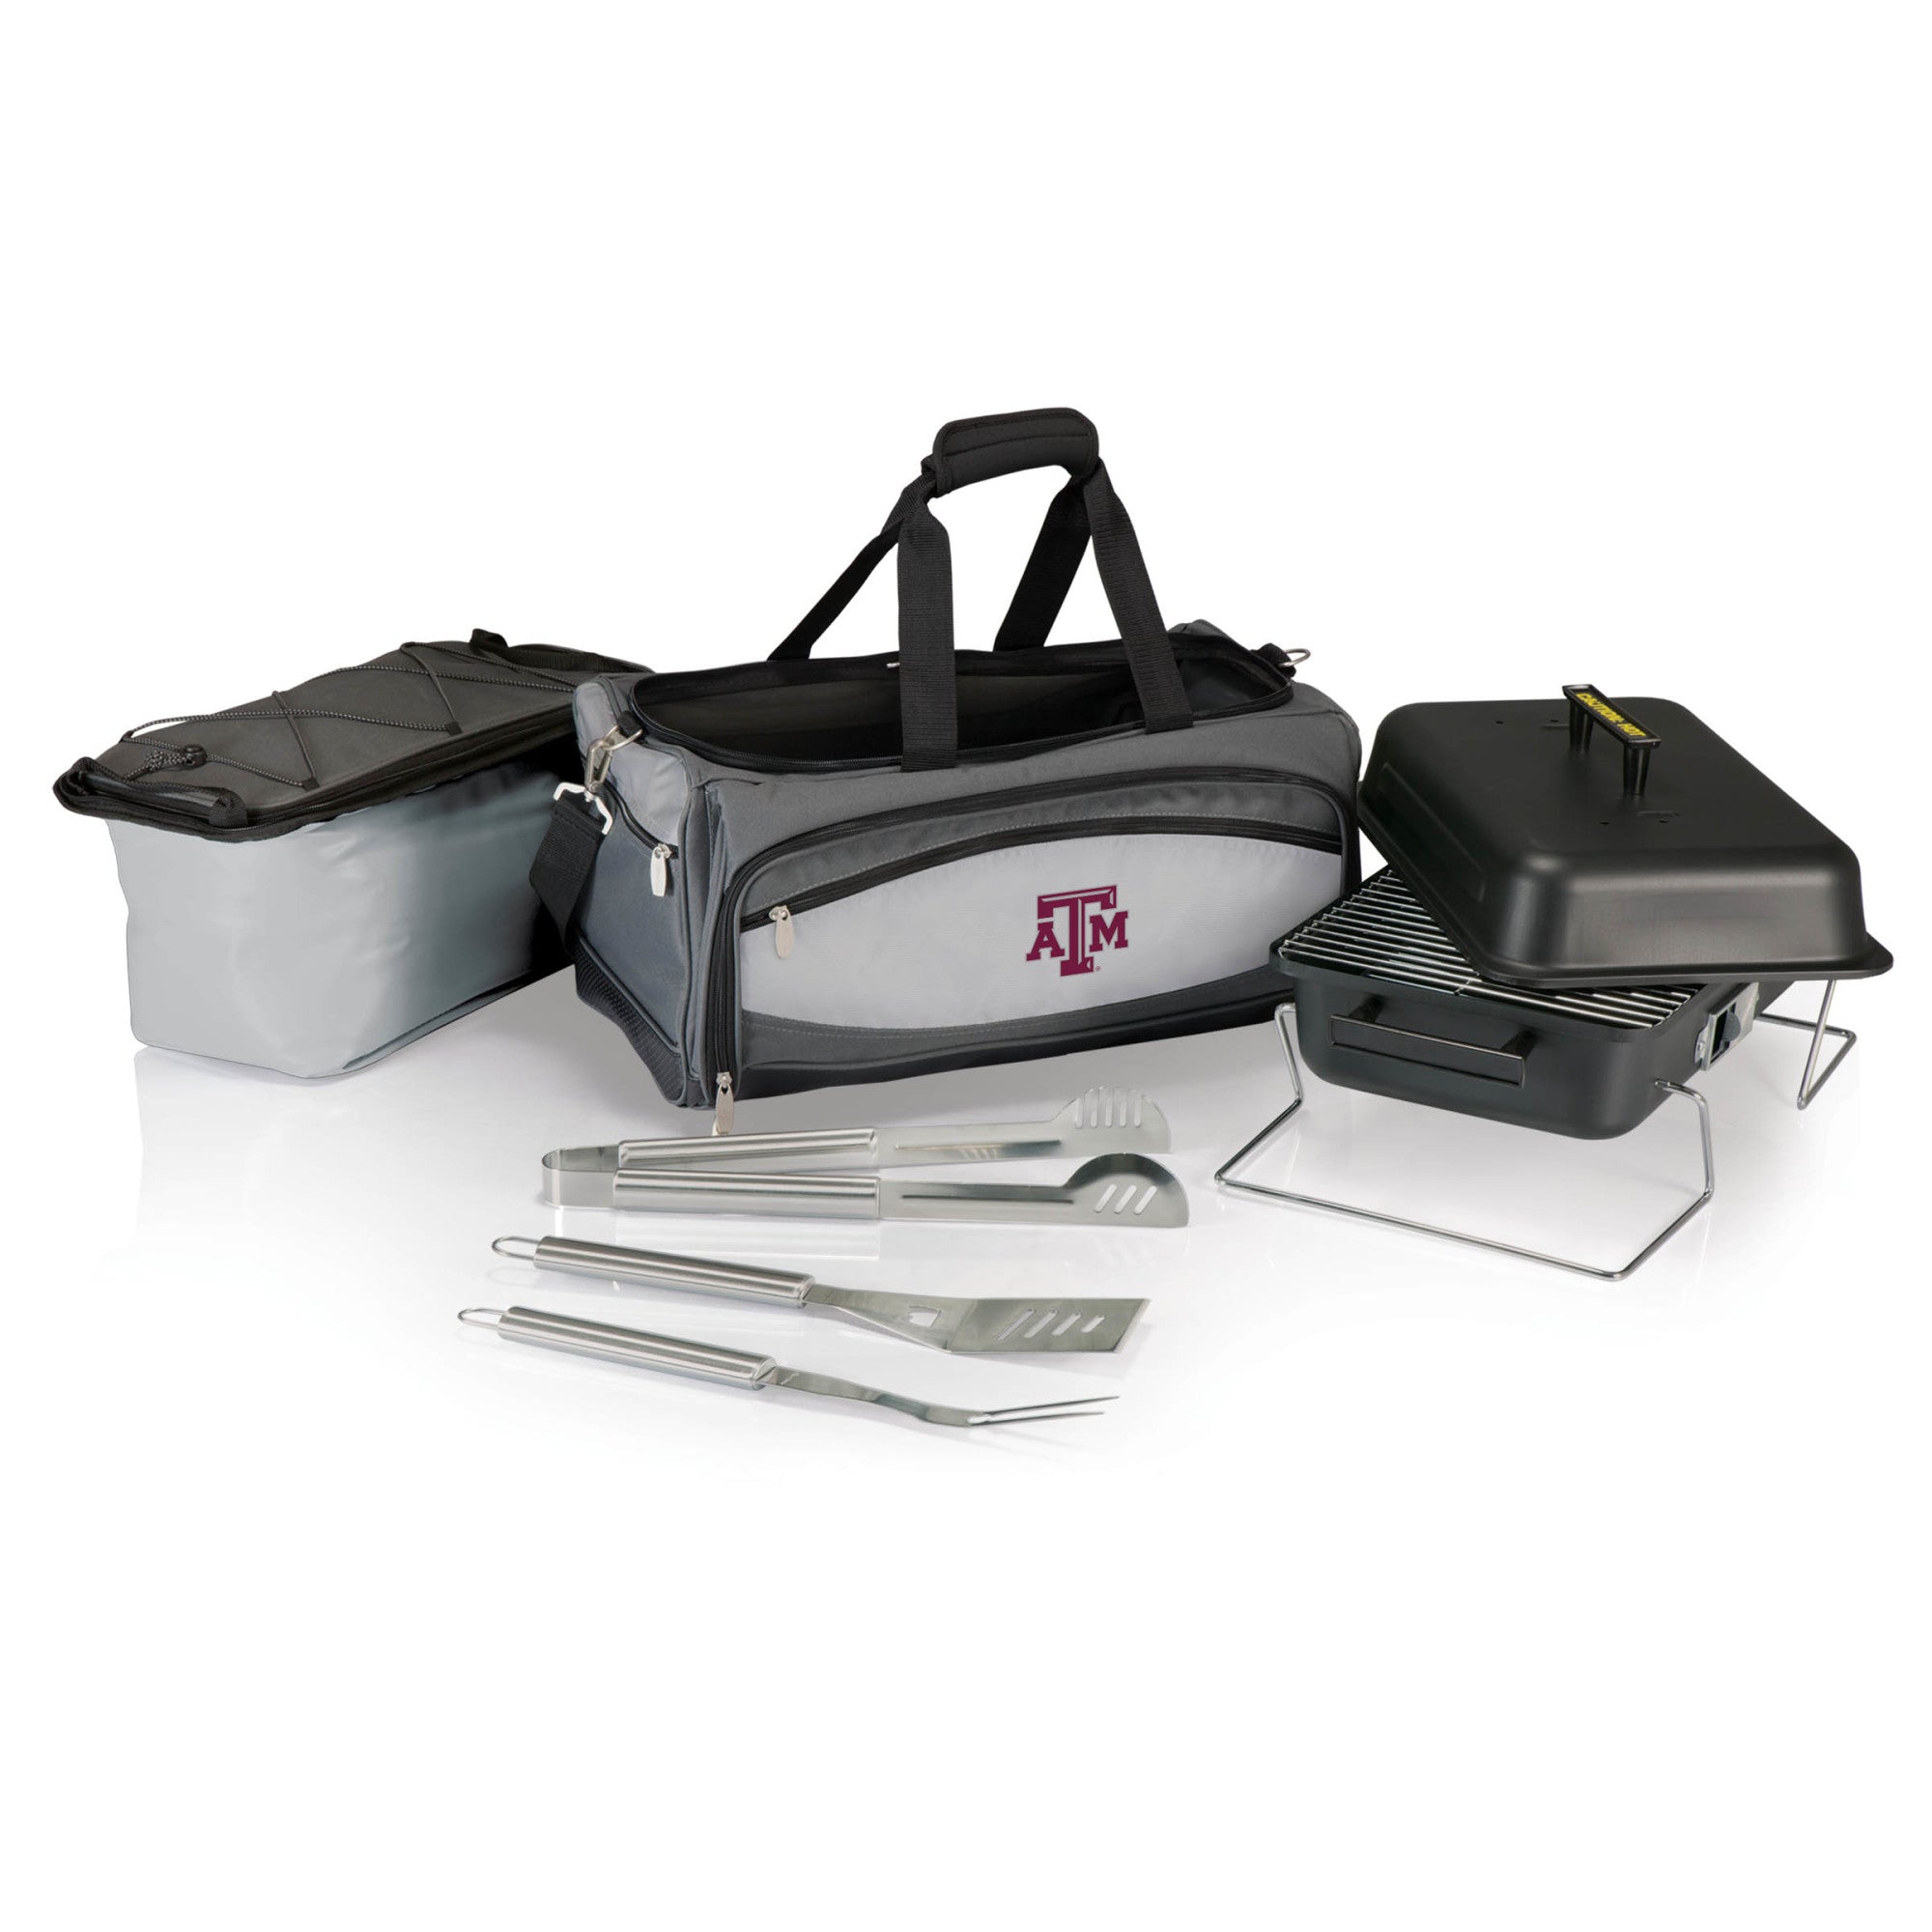 Texas A&M Aggies - Buccaneer Portable Charcoal Grill & Cooler Tote